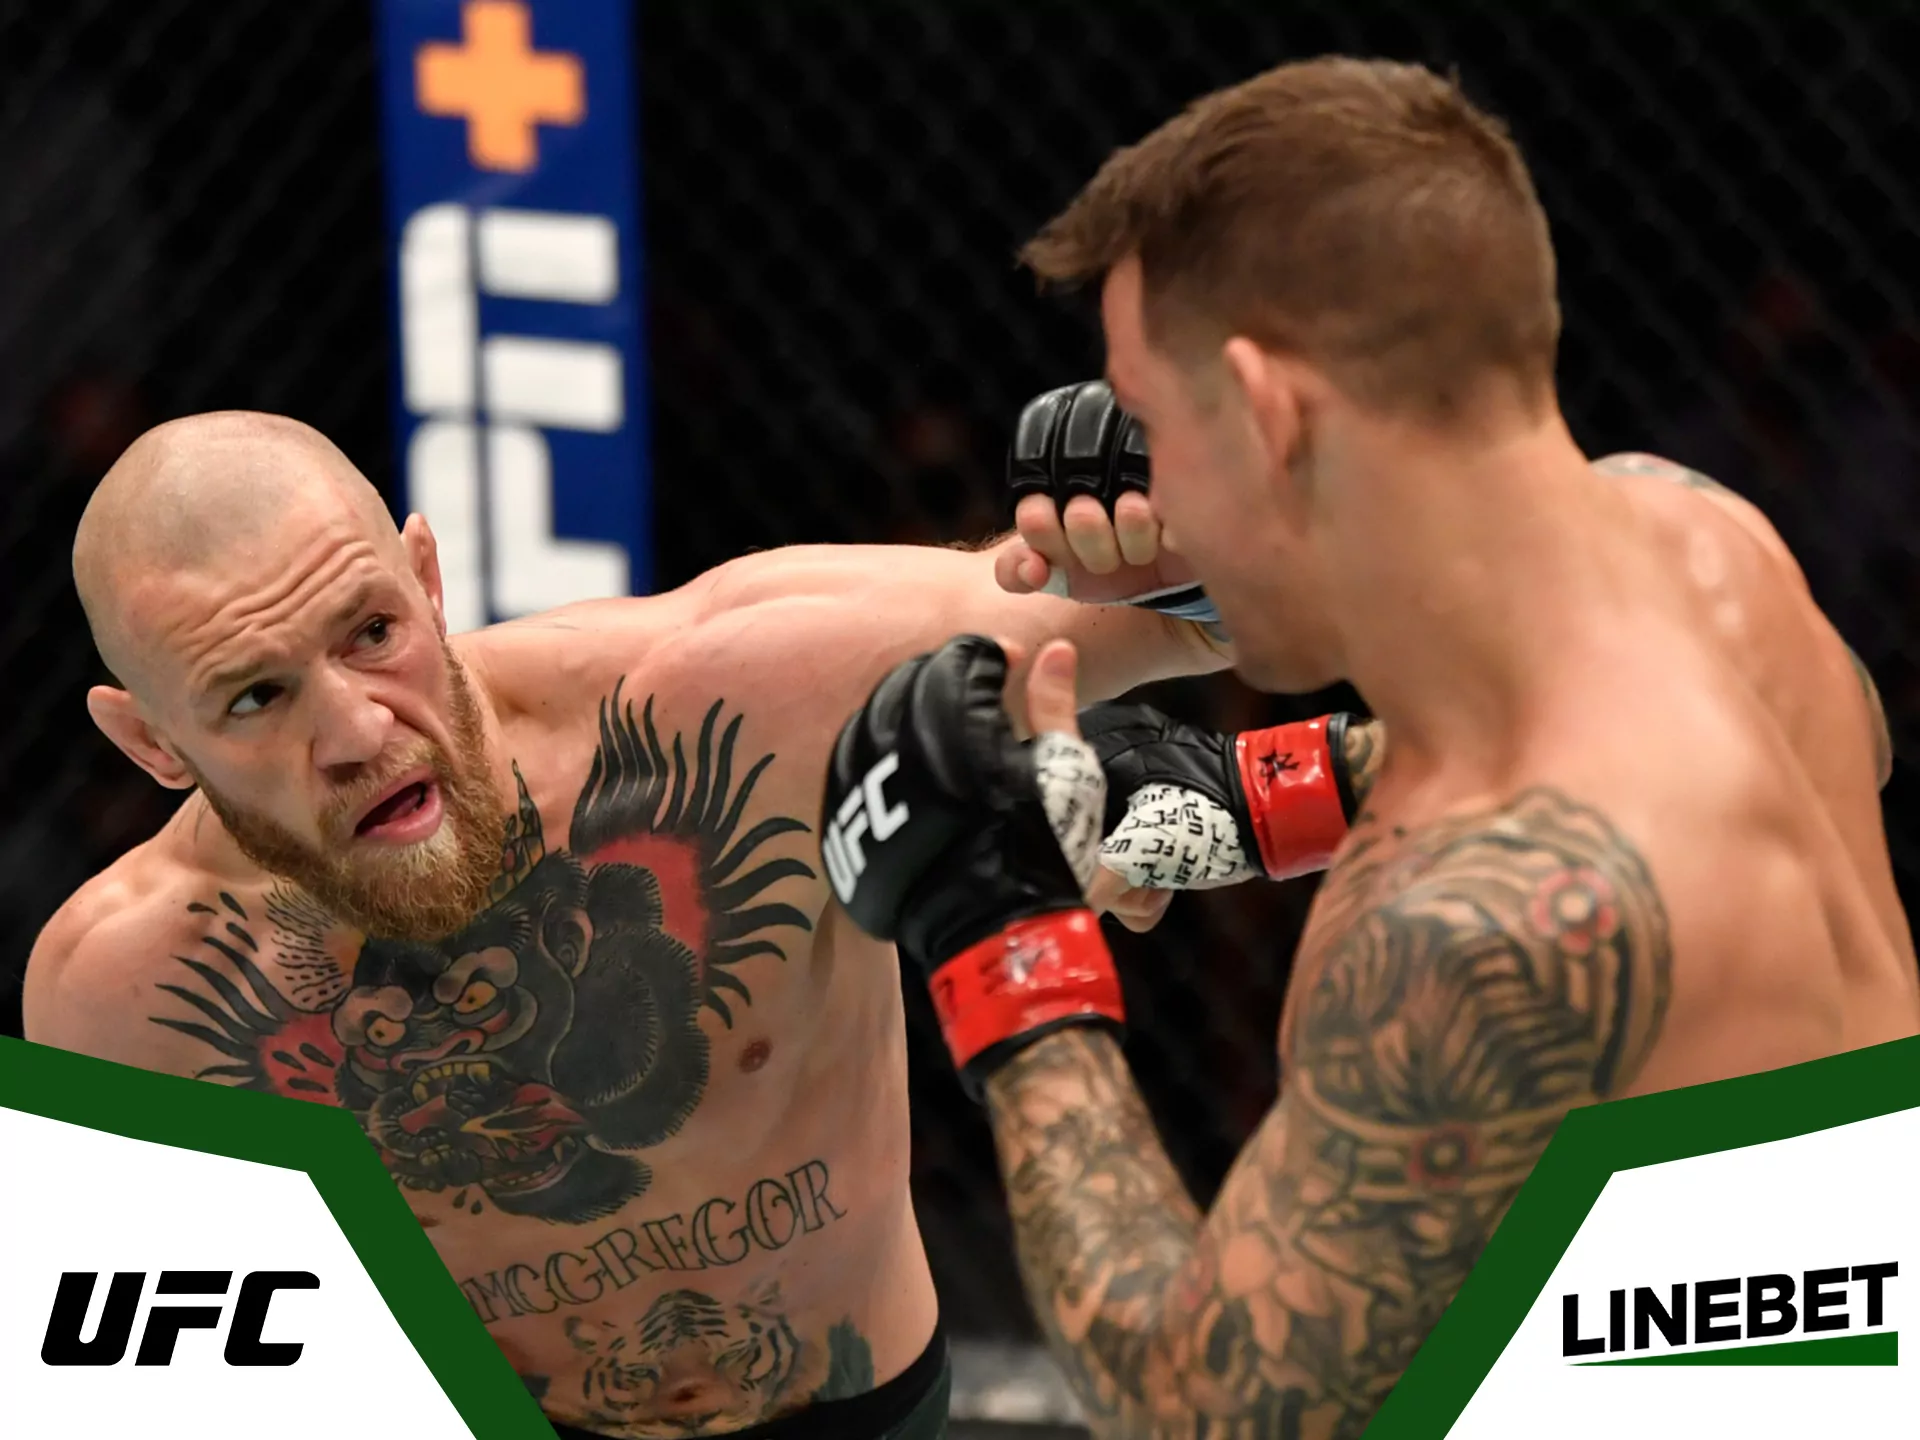 Check for spectacular UFC matches at Linebet.